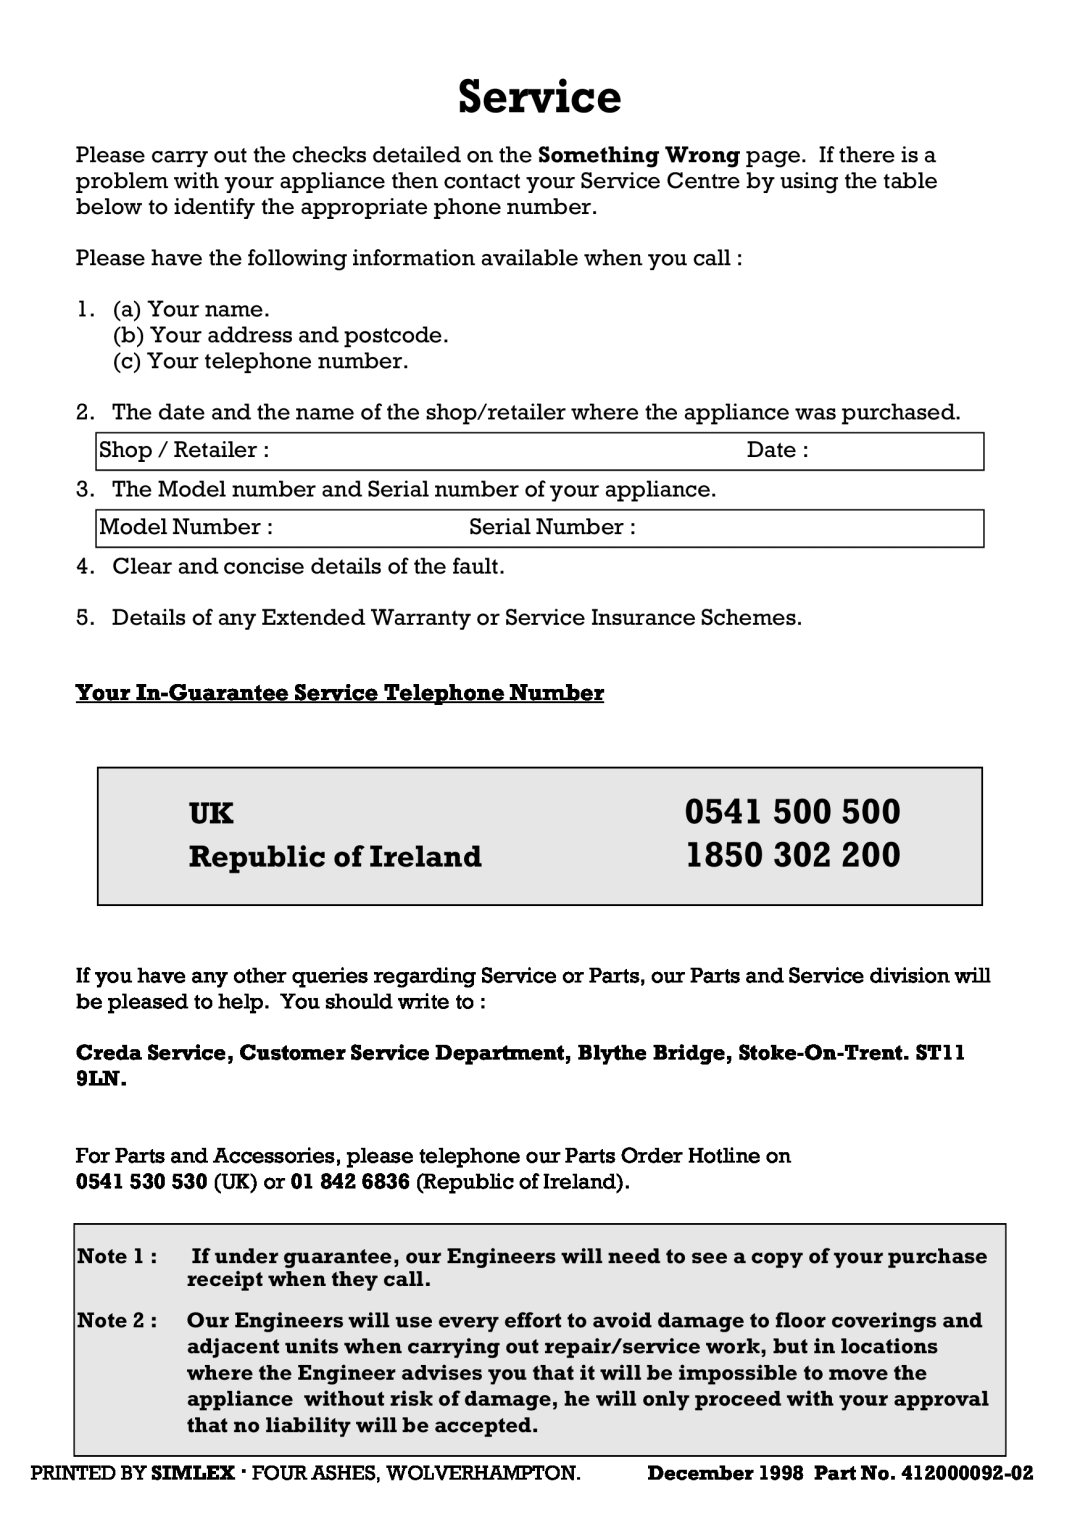 Creda 41202 installation instructions 0541, UK Republic of Ireland, Your In-Guarantee Service Telephone Number 